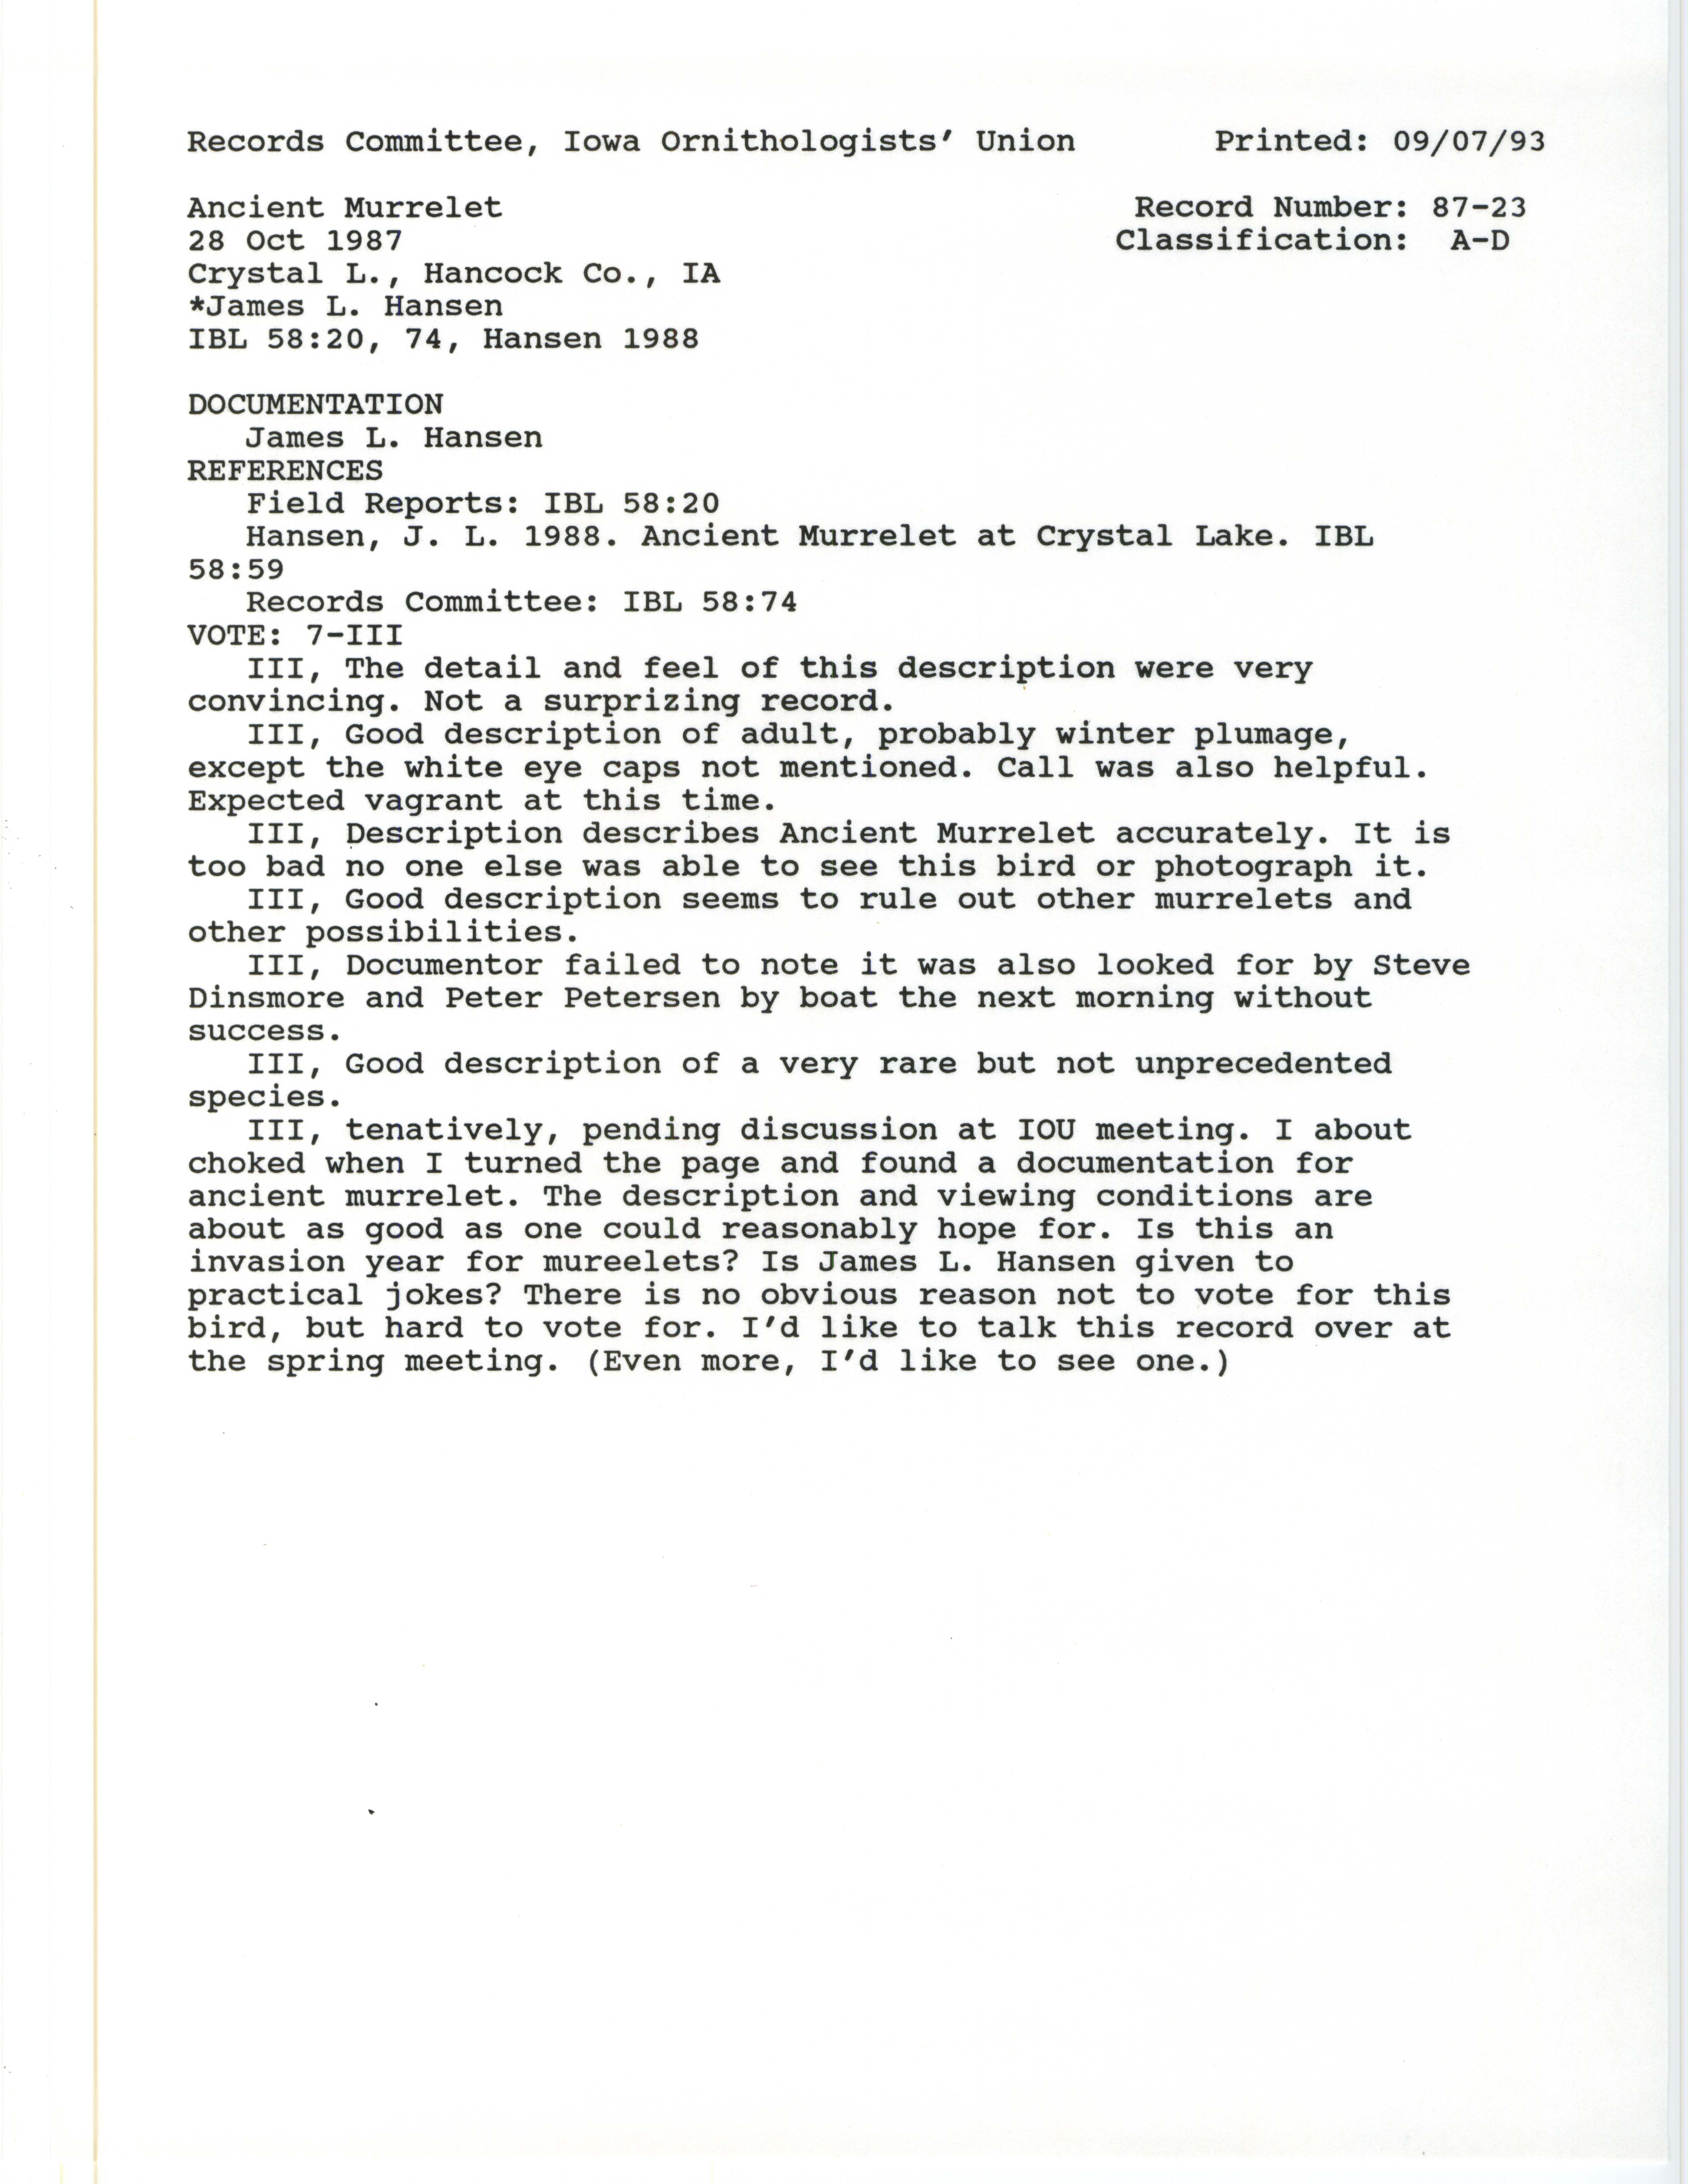 Records Committee review for rare bird sighting for Ancient Murrelet at Crystal Lake, 1987